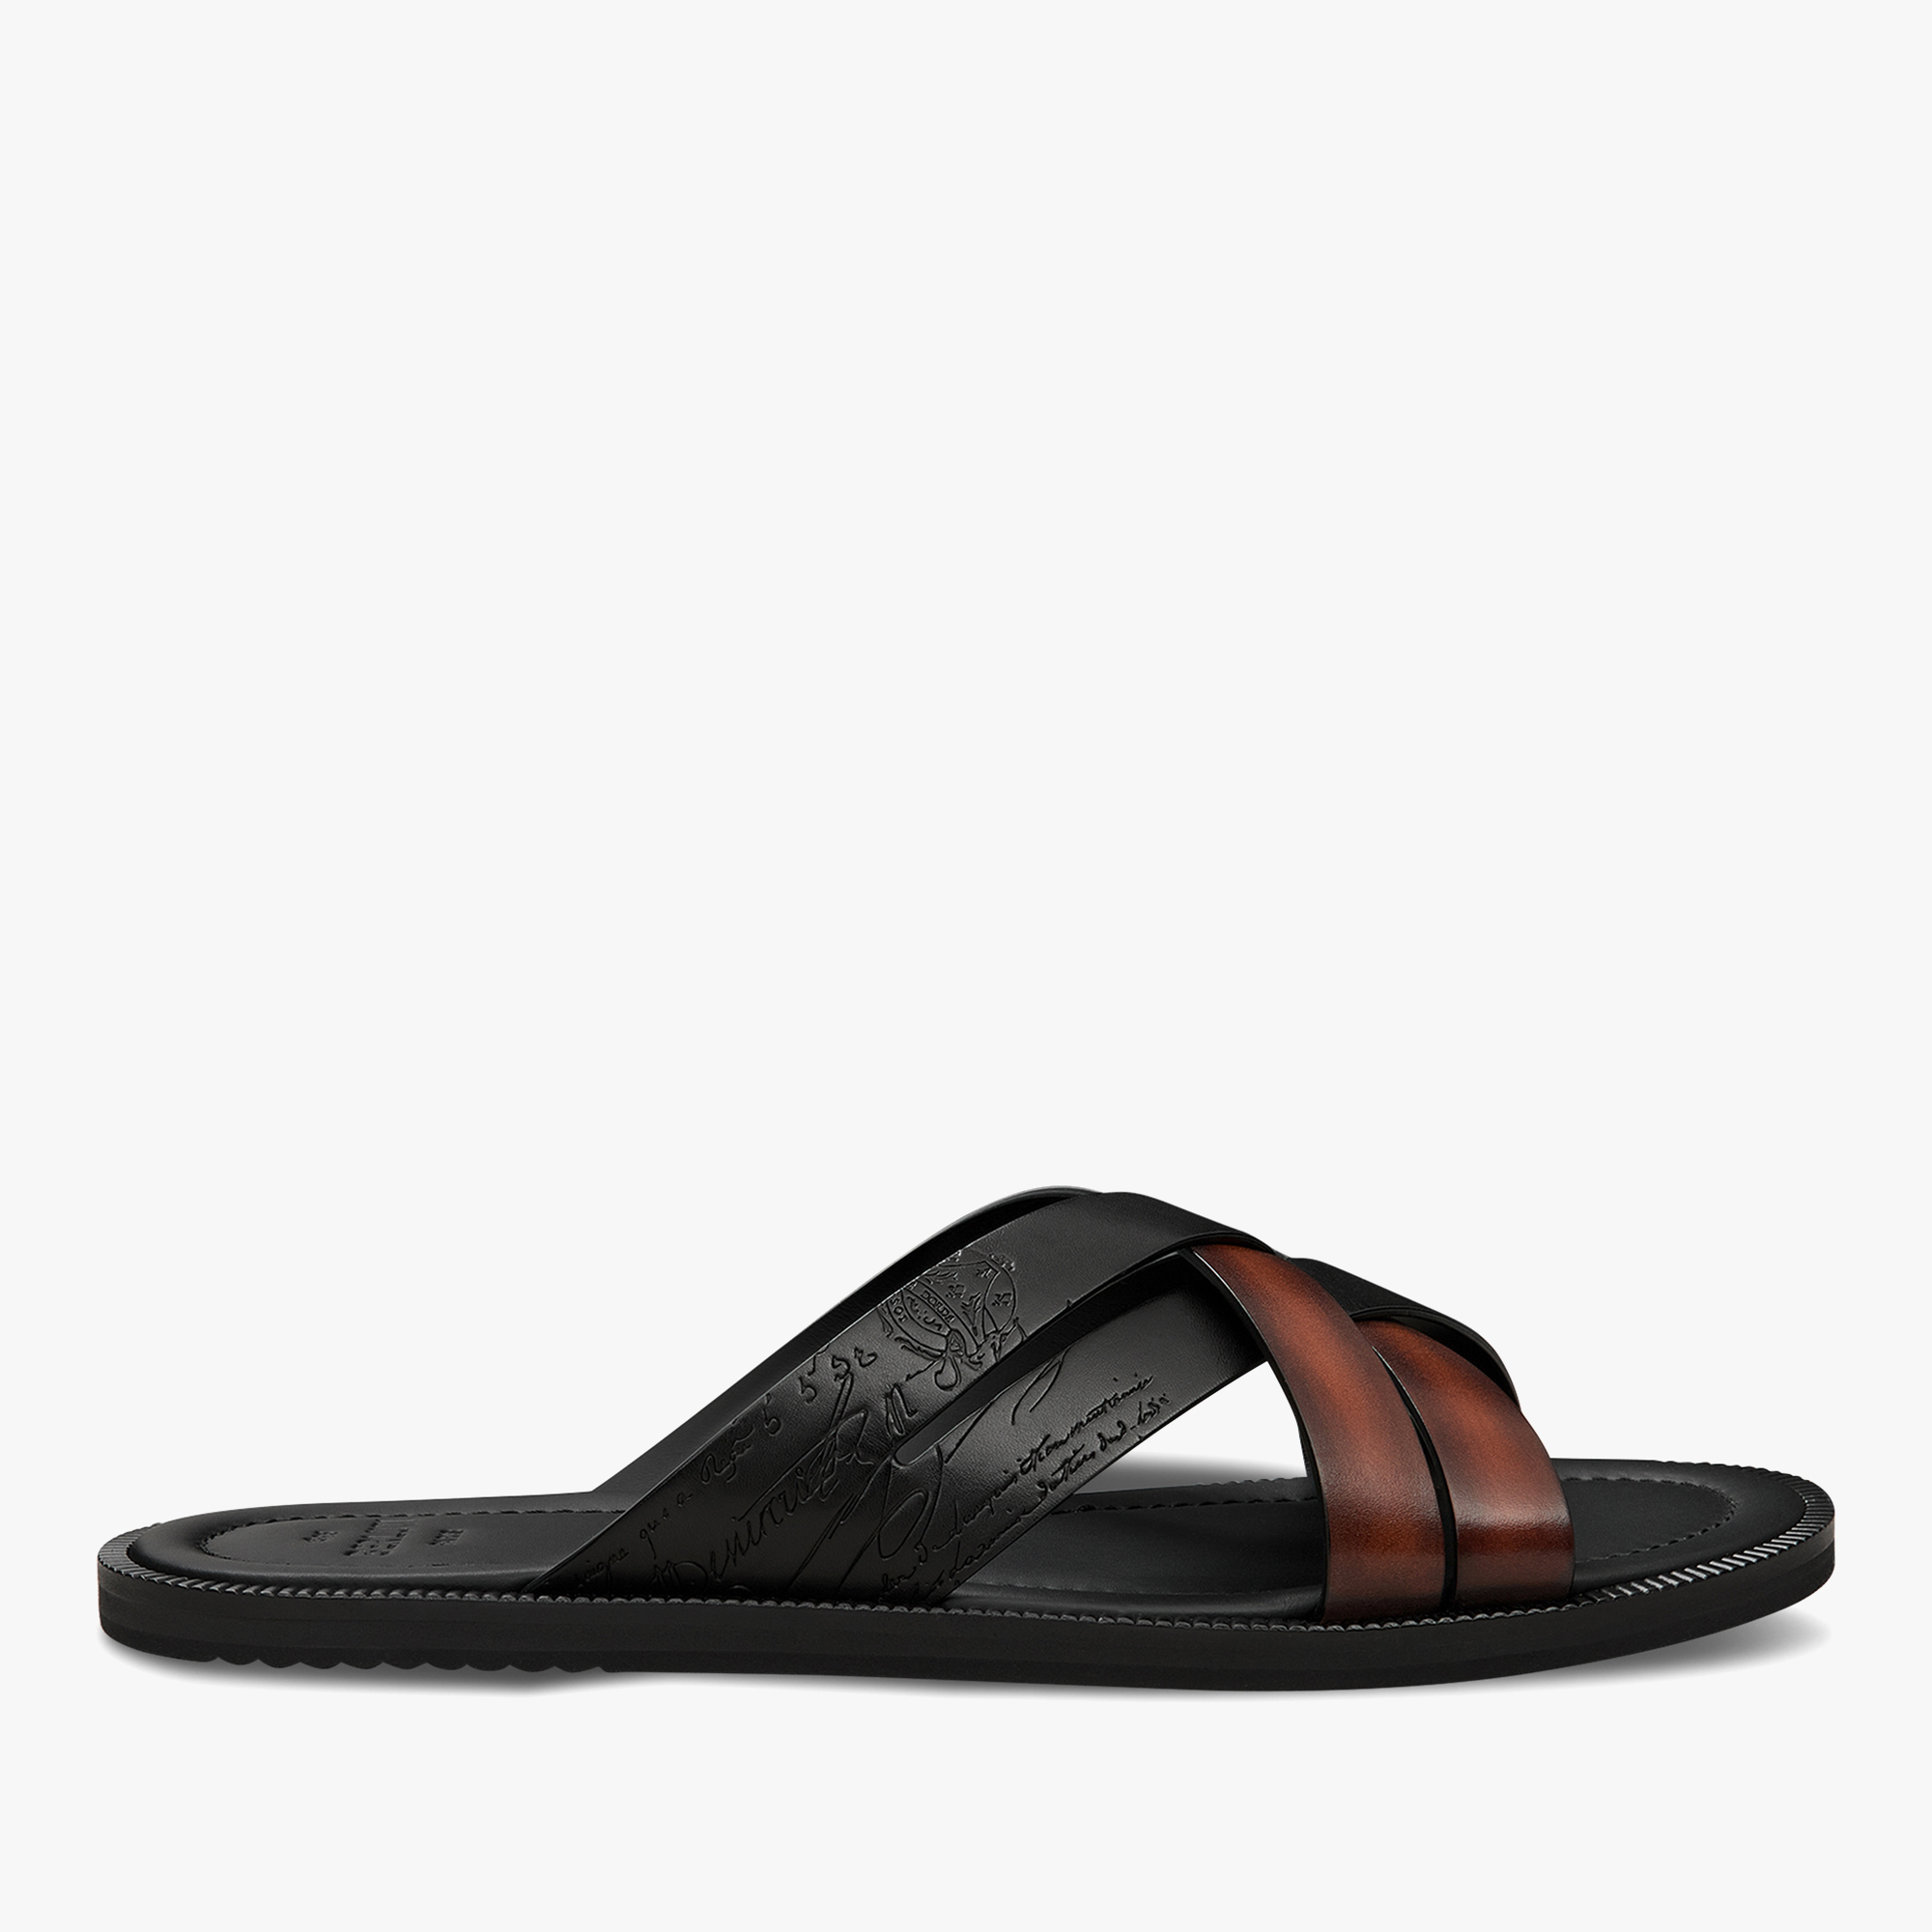 Sifnos Scritto Leather Sandal, CACAO INTENSO, hi-res